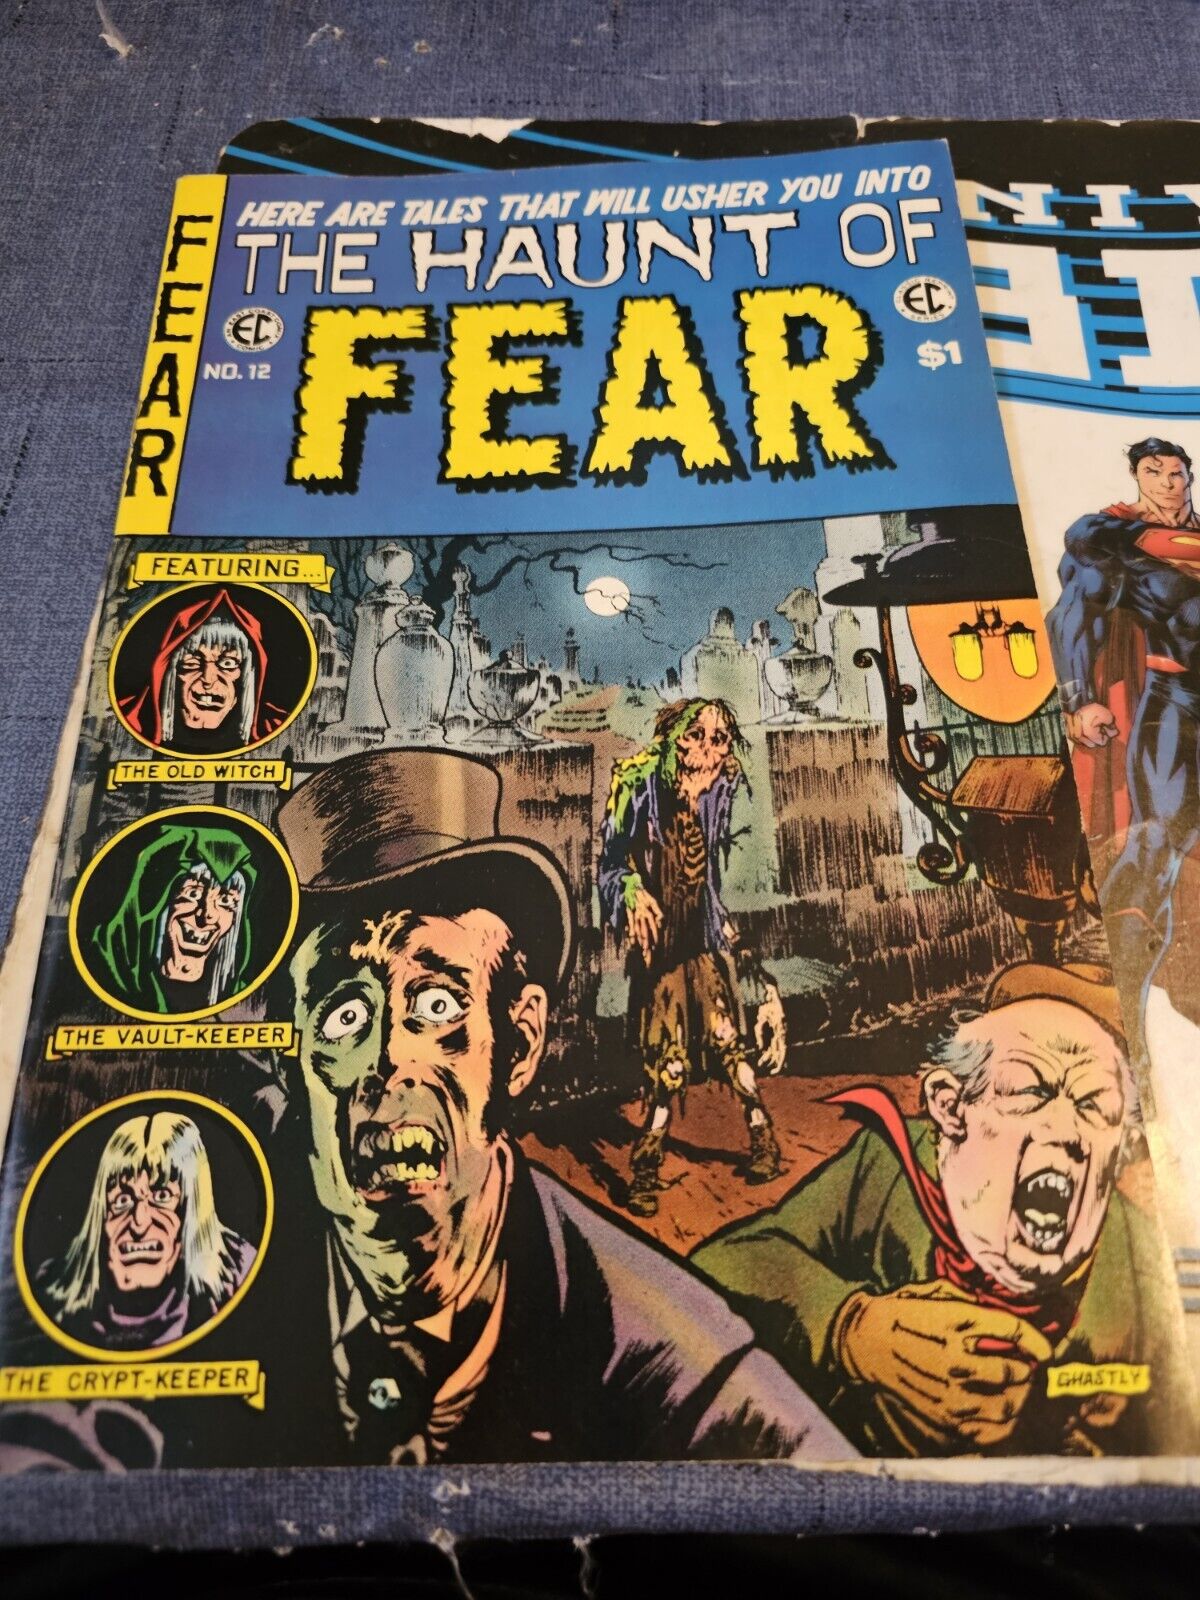 The Haunt of Fear #12 (1973) FN- Vault-Keeper, Crypt-Keeper